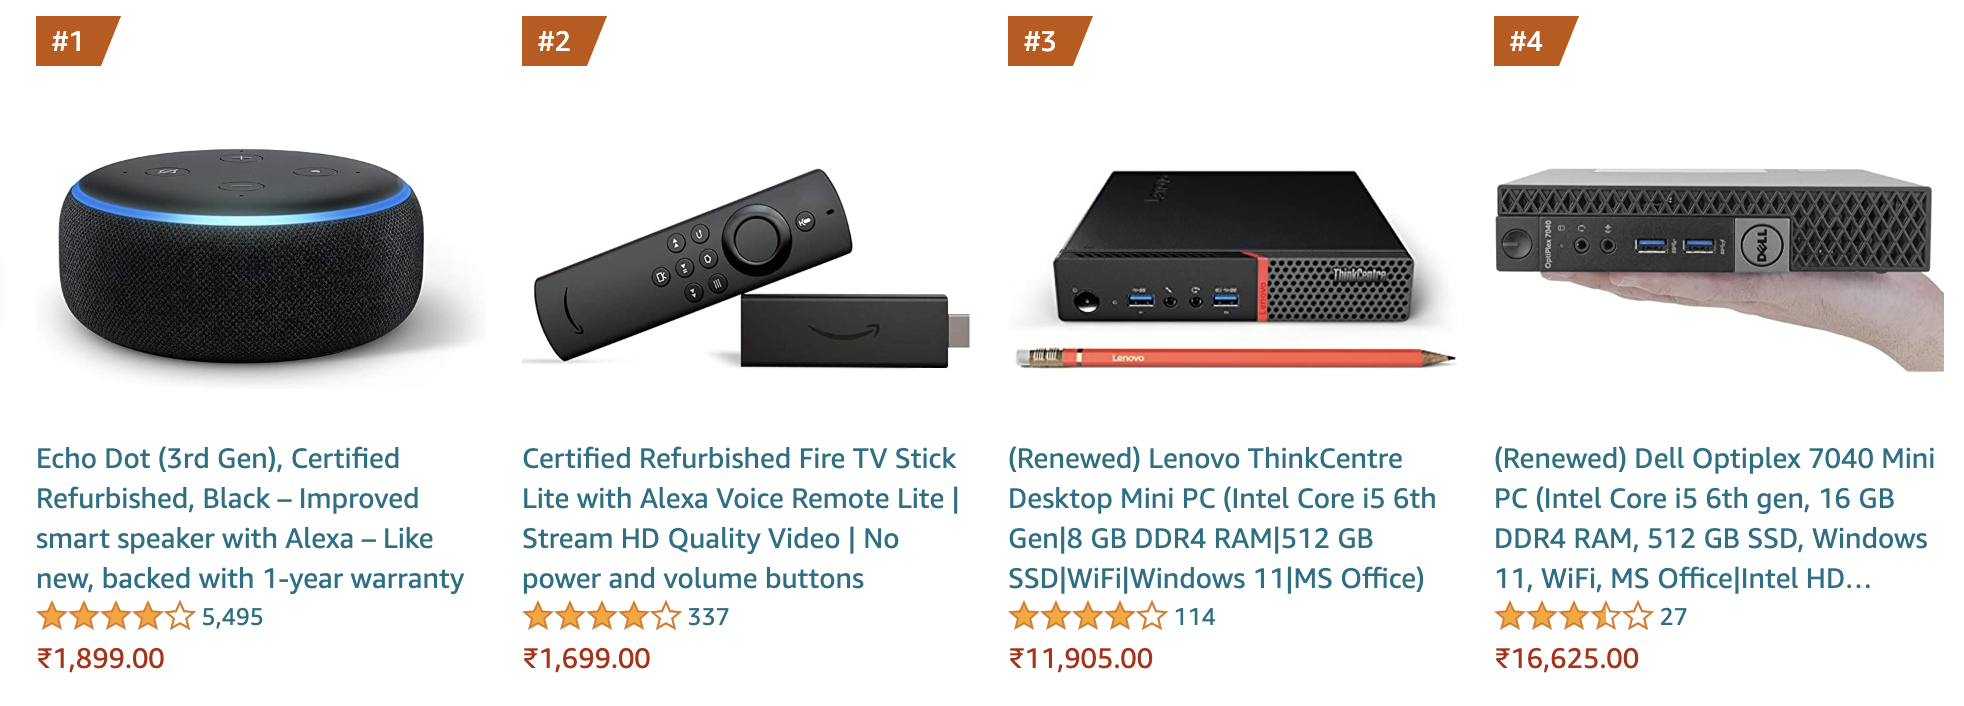 sale:  Sale Bestsellers : Top-selling products with the best  discounts sold yesterday - The Economic Times